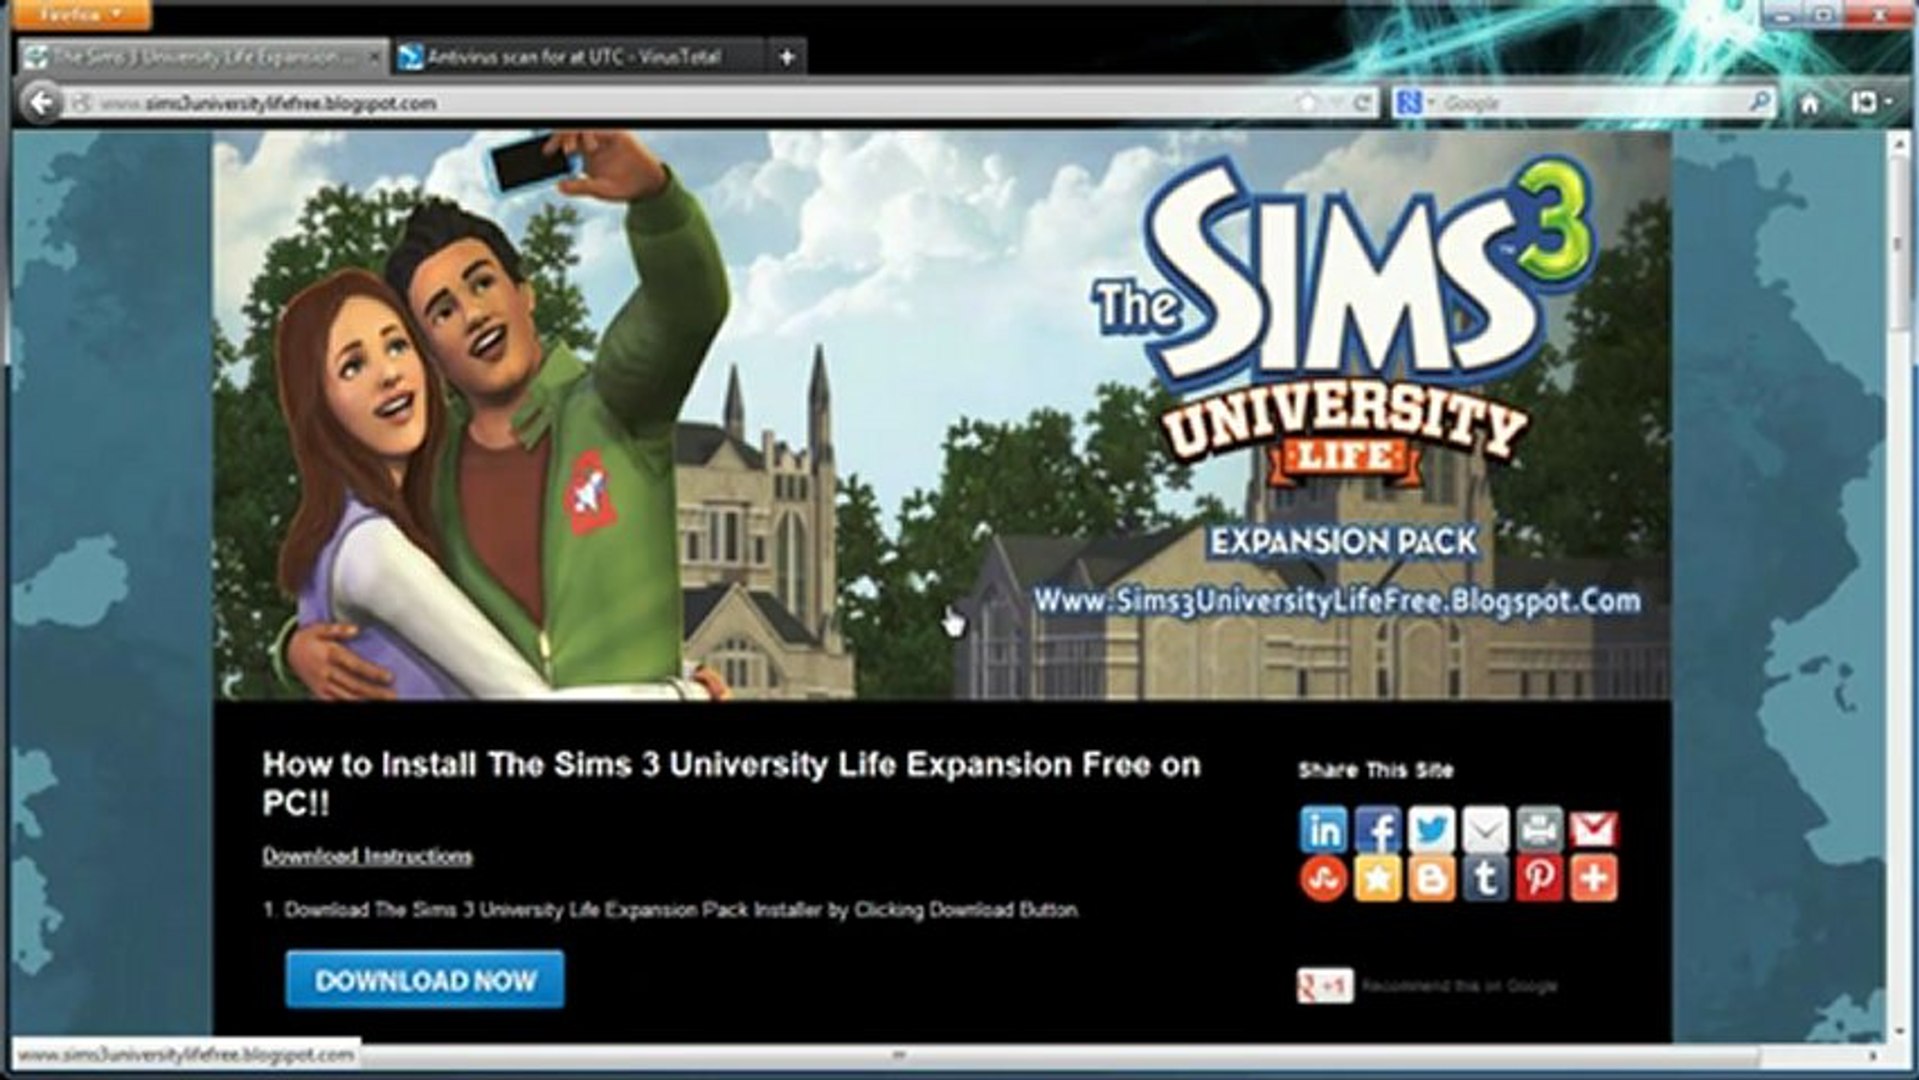 Step by Step, THREE FREE packs The Sims 4 NOW, how to guide